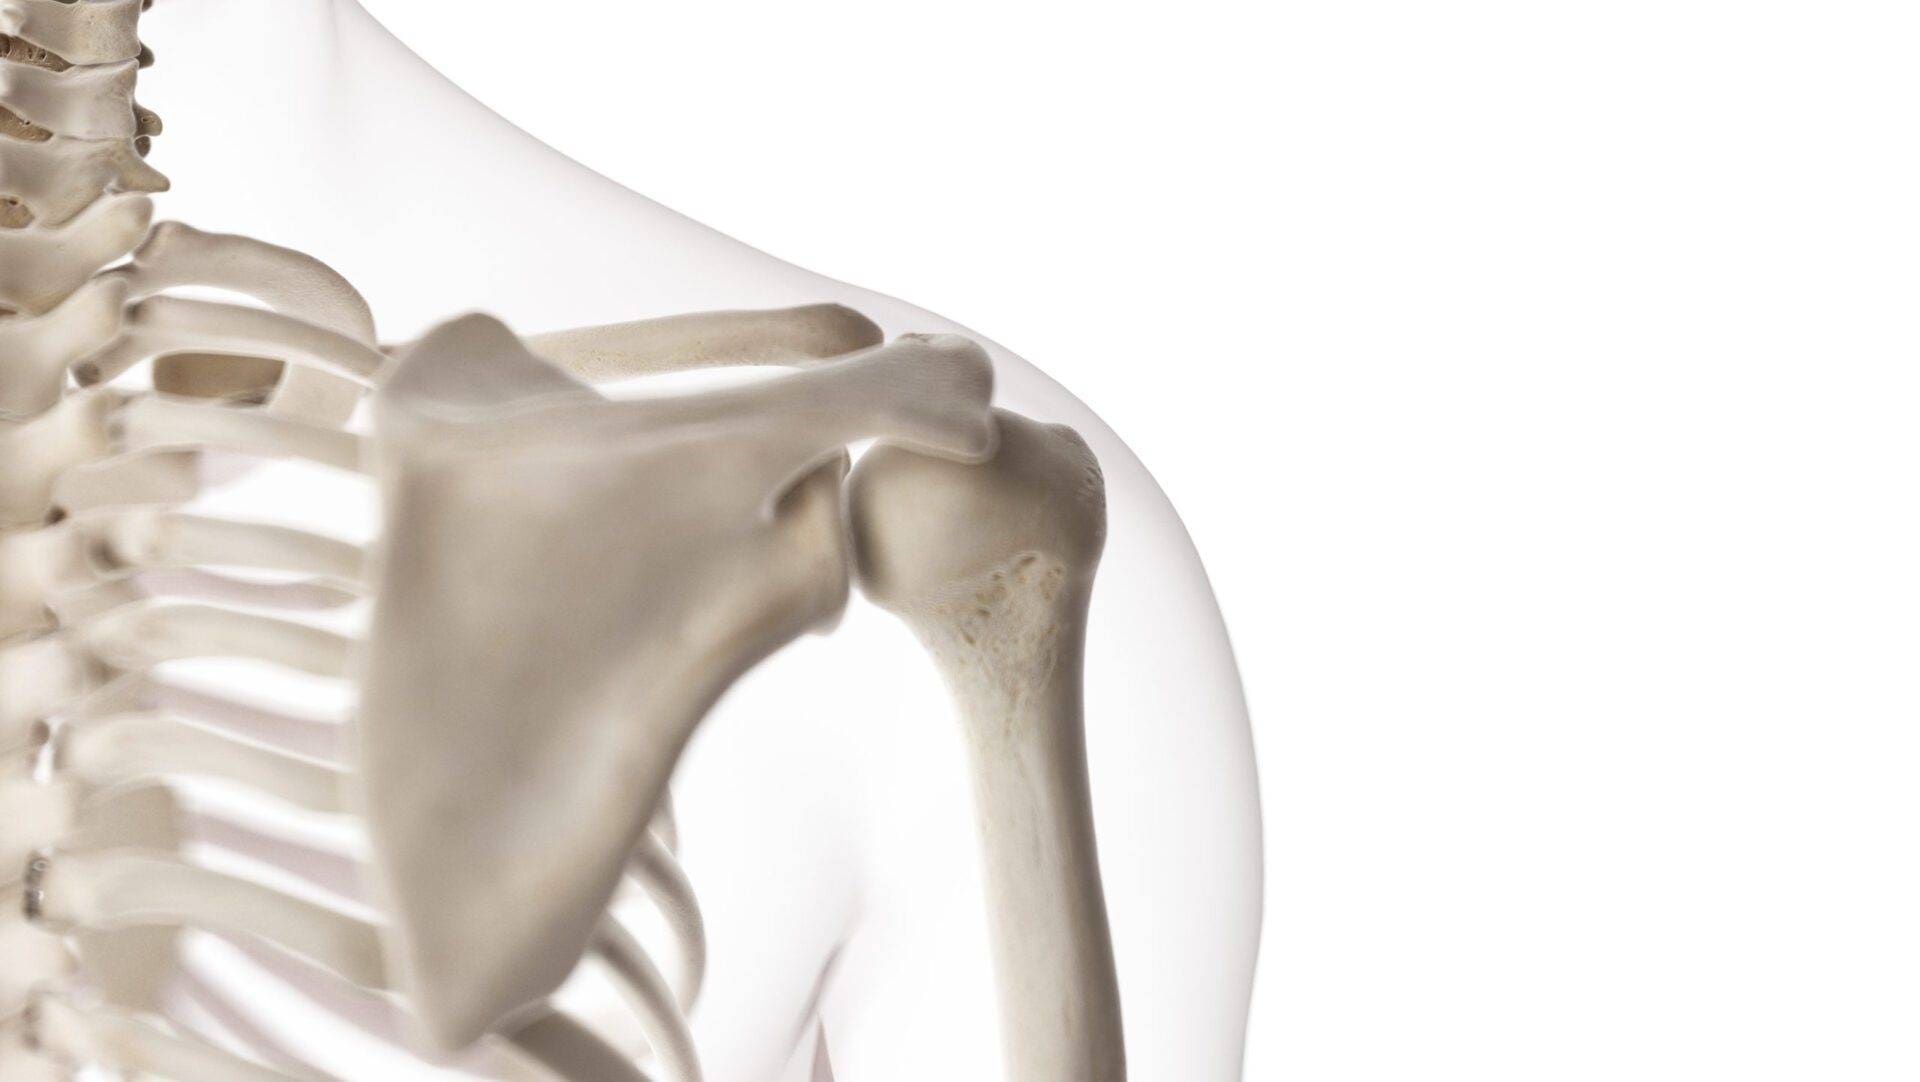 3d rendered medically accurate illustration of the shoulder joint